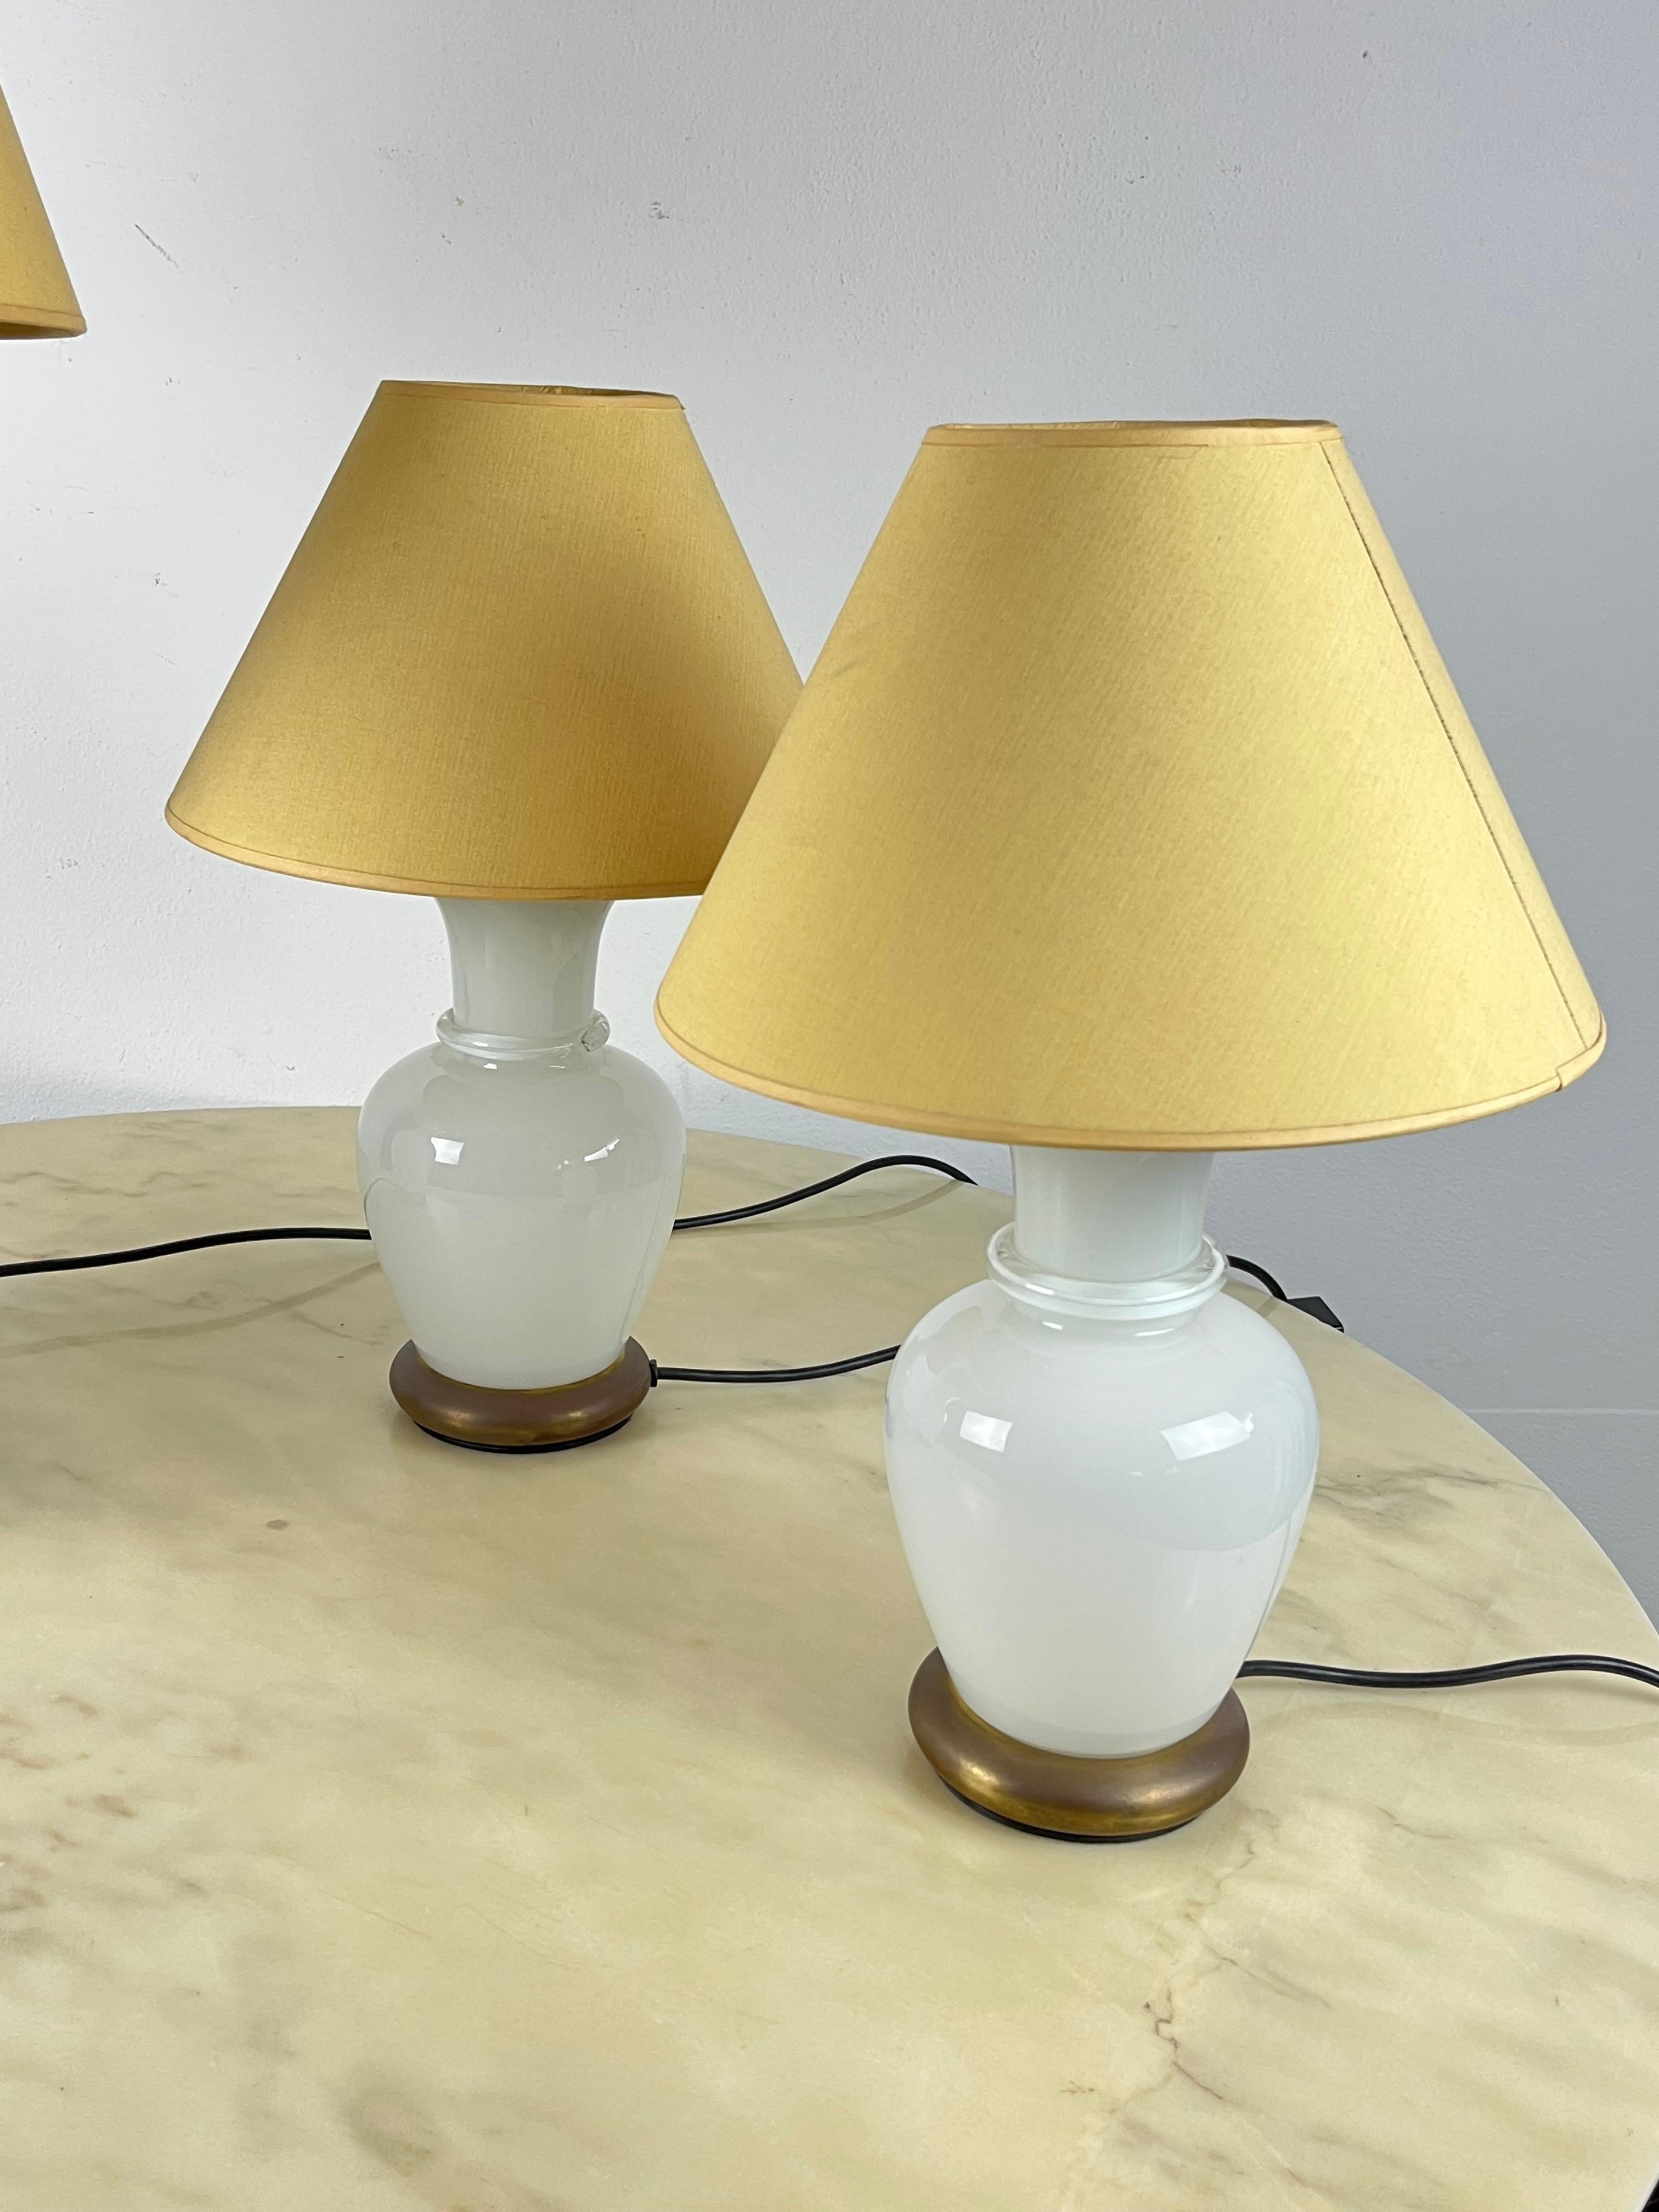 Set of 3 Murano Glass and Brass Table Lamps, F. Fabbian, Italy, 1970s In Good Condition For Sale In Palermo, IT